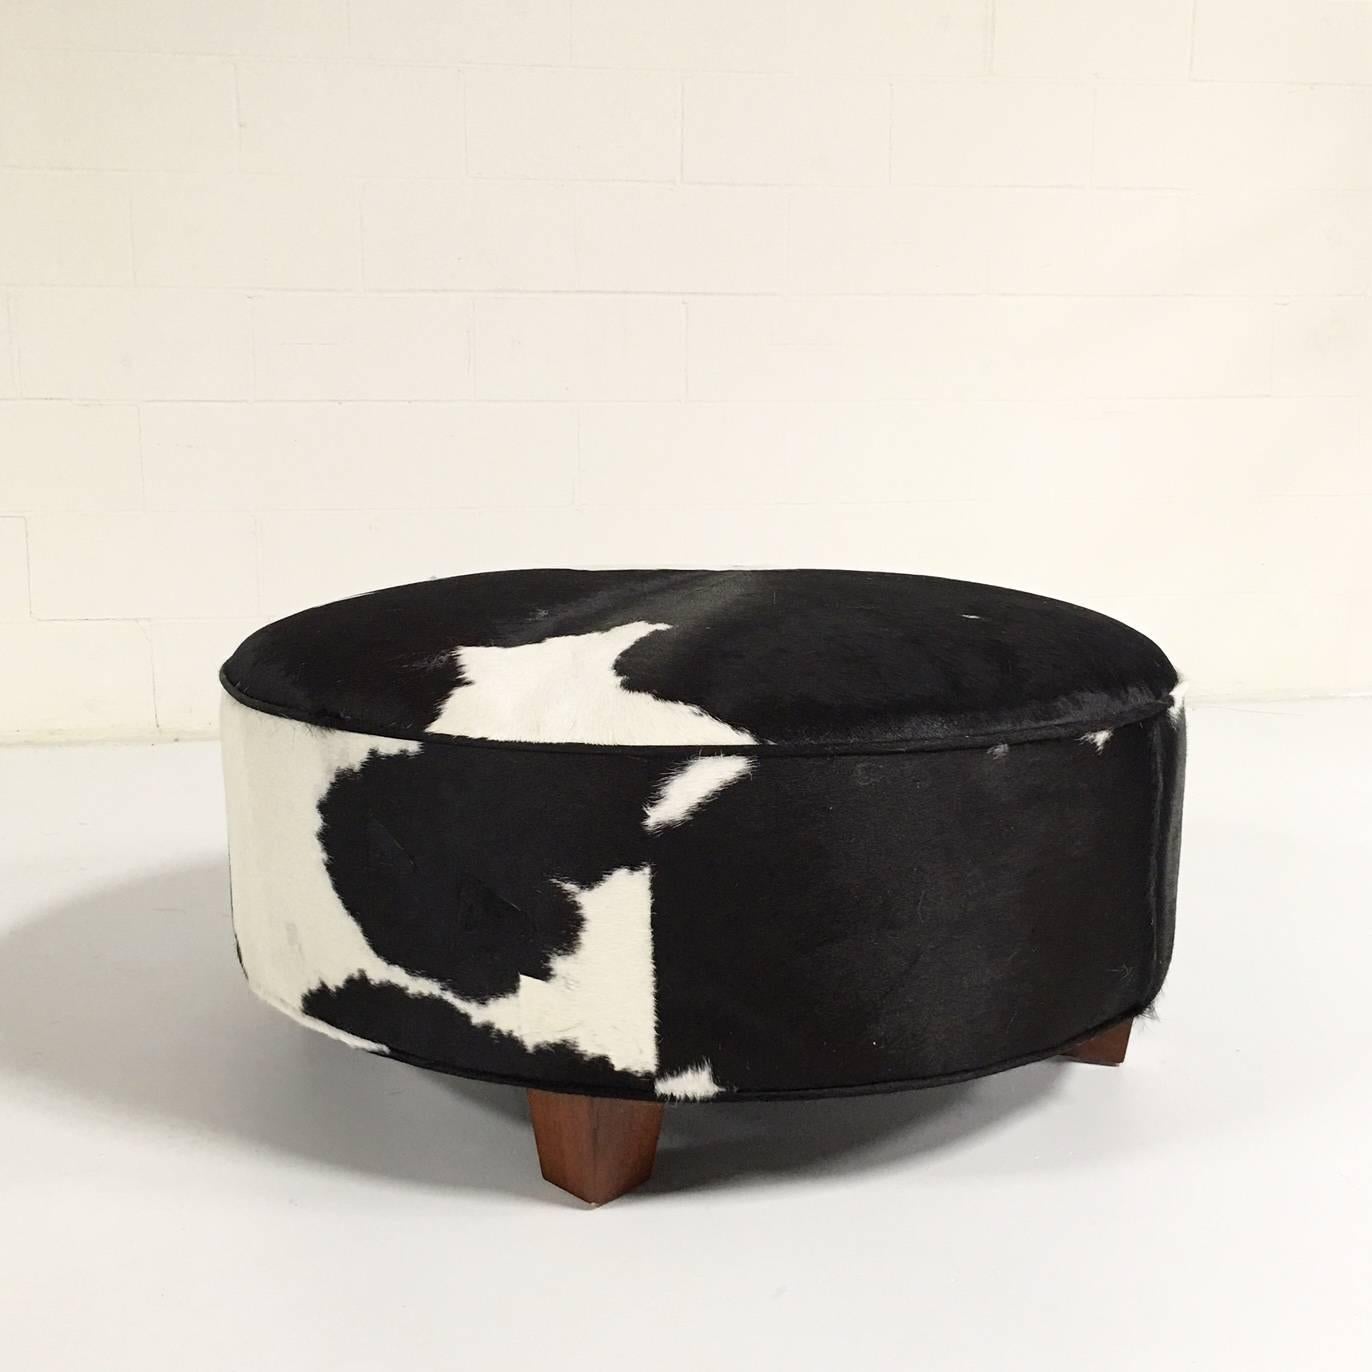 We love the size of this ottoman - it’s big enough for your feet to share with a polished silver tray and a stack of art books. And nothing is more classic than black and white.

Diameter: 38.5 inches.
Height: 15 inches.

The making of this